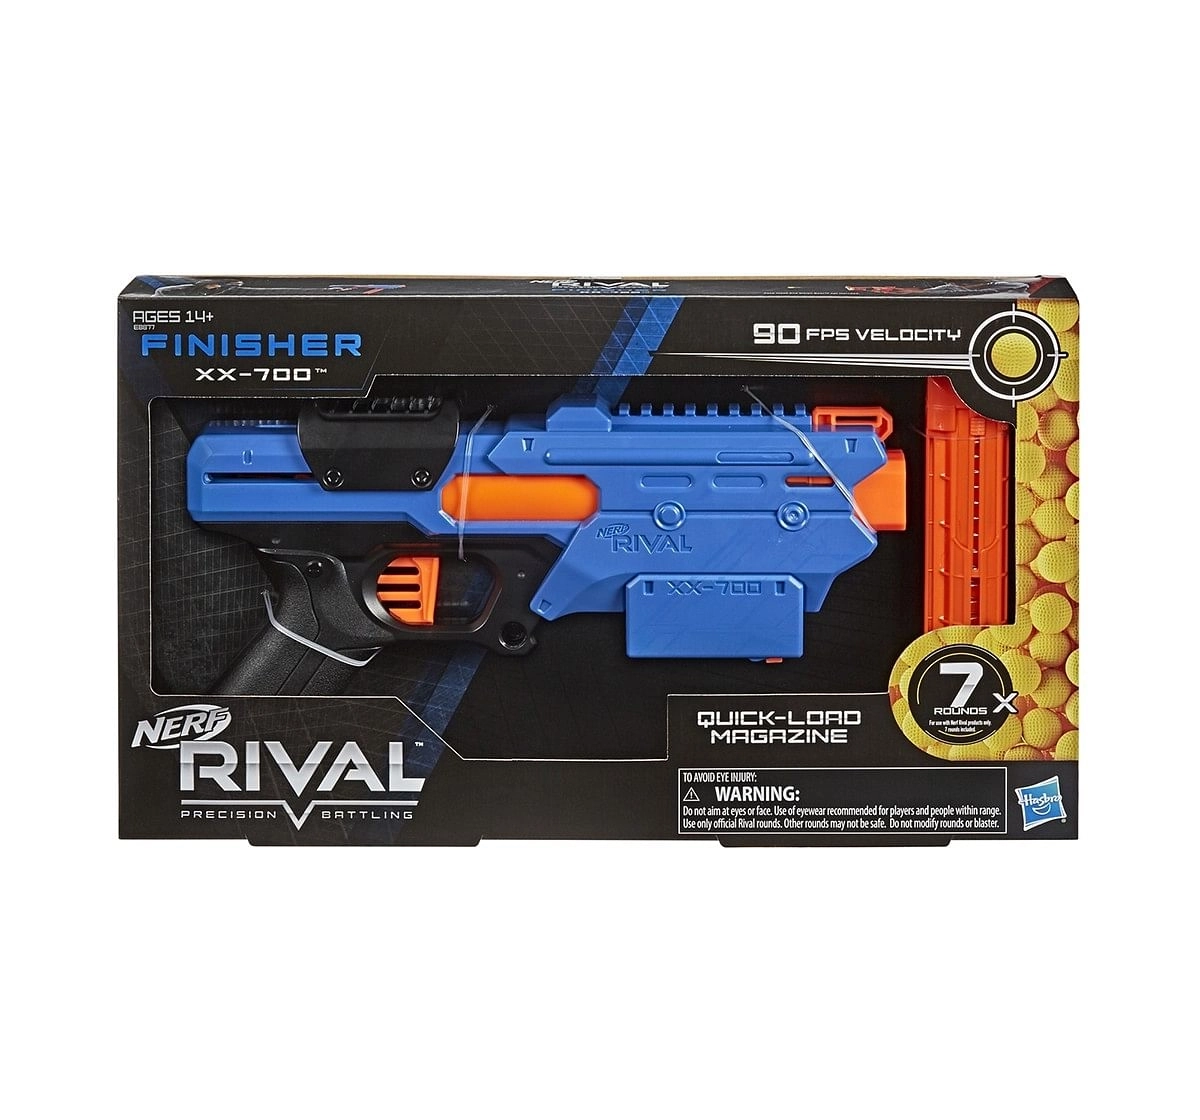 Nerf Rival Finisher XX-700 Blaster Toy Gun -- Quick-Load Magazine, Spring Action, Includes 7 Official Nerf Rival Rounds -- Team Blue Blasters for Kids age 14Y+ 